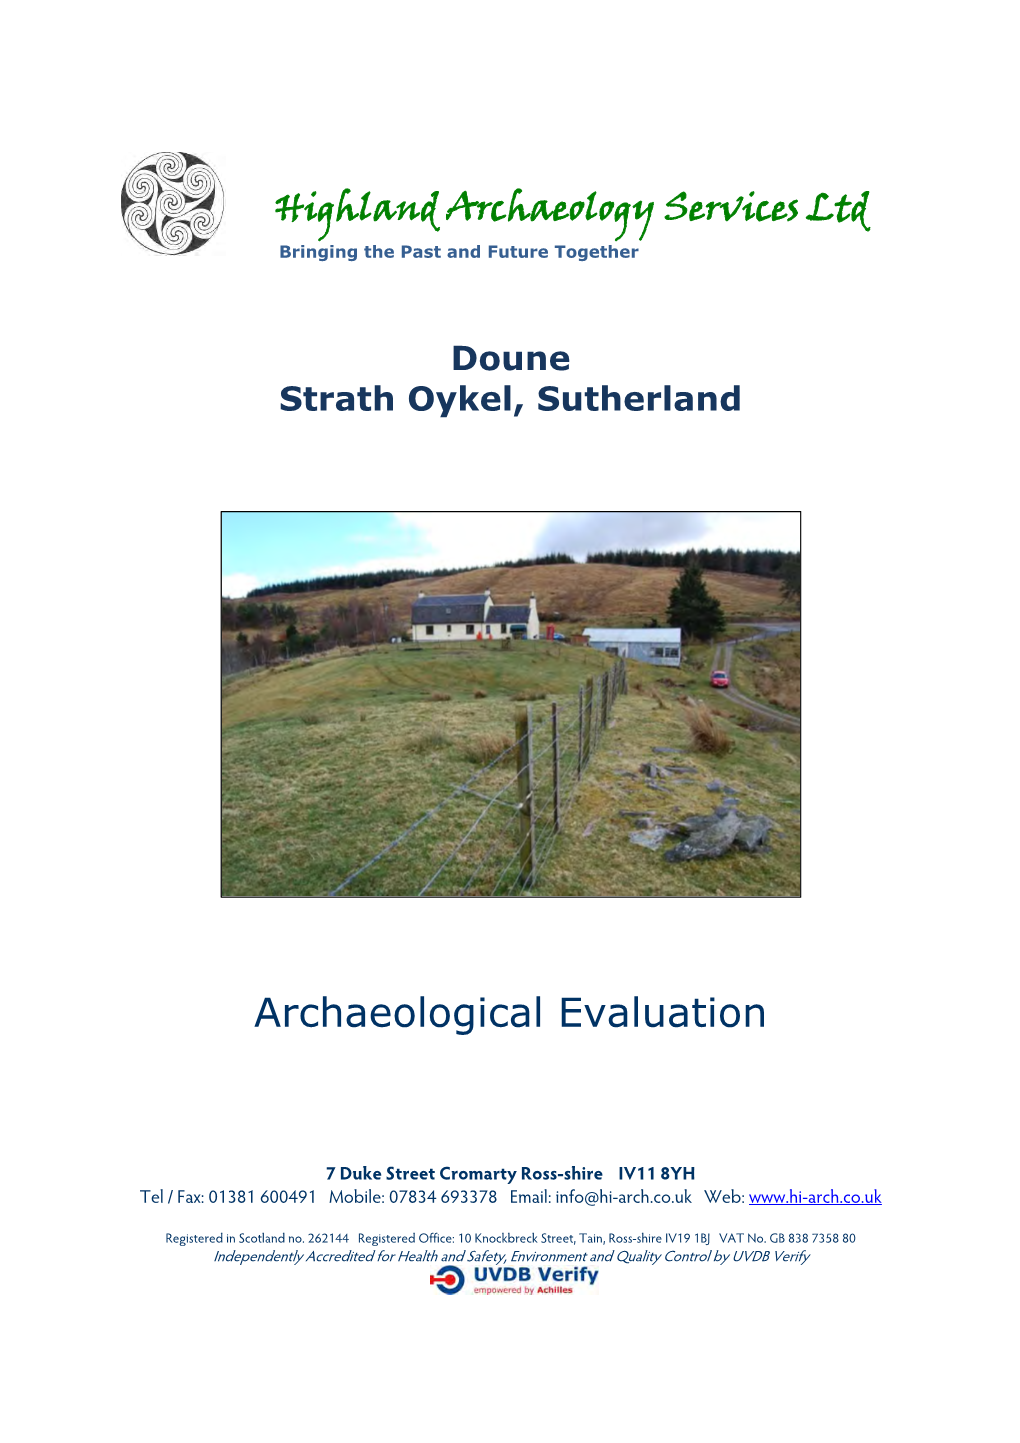 Archaeological Evaluation